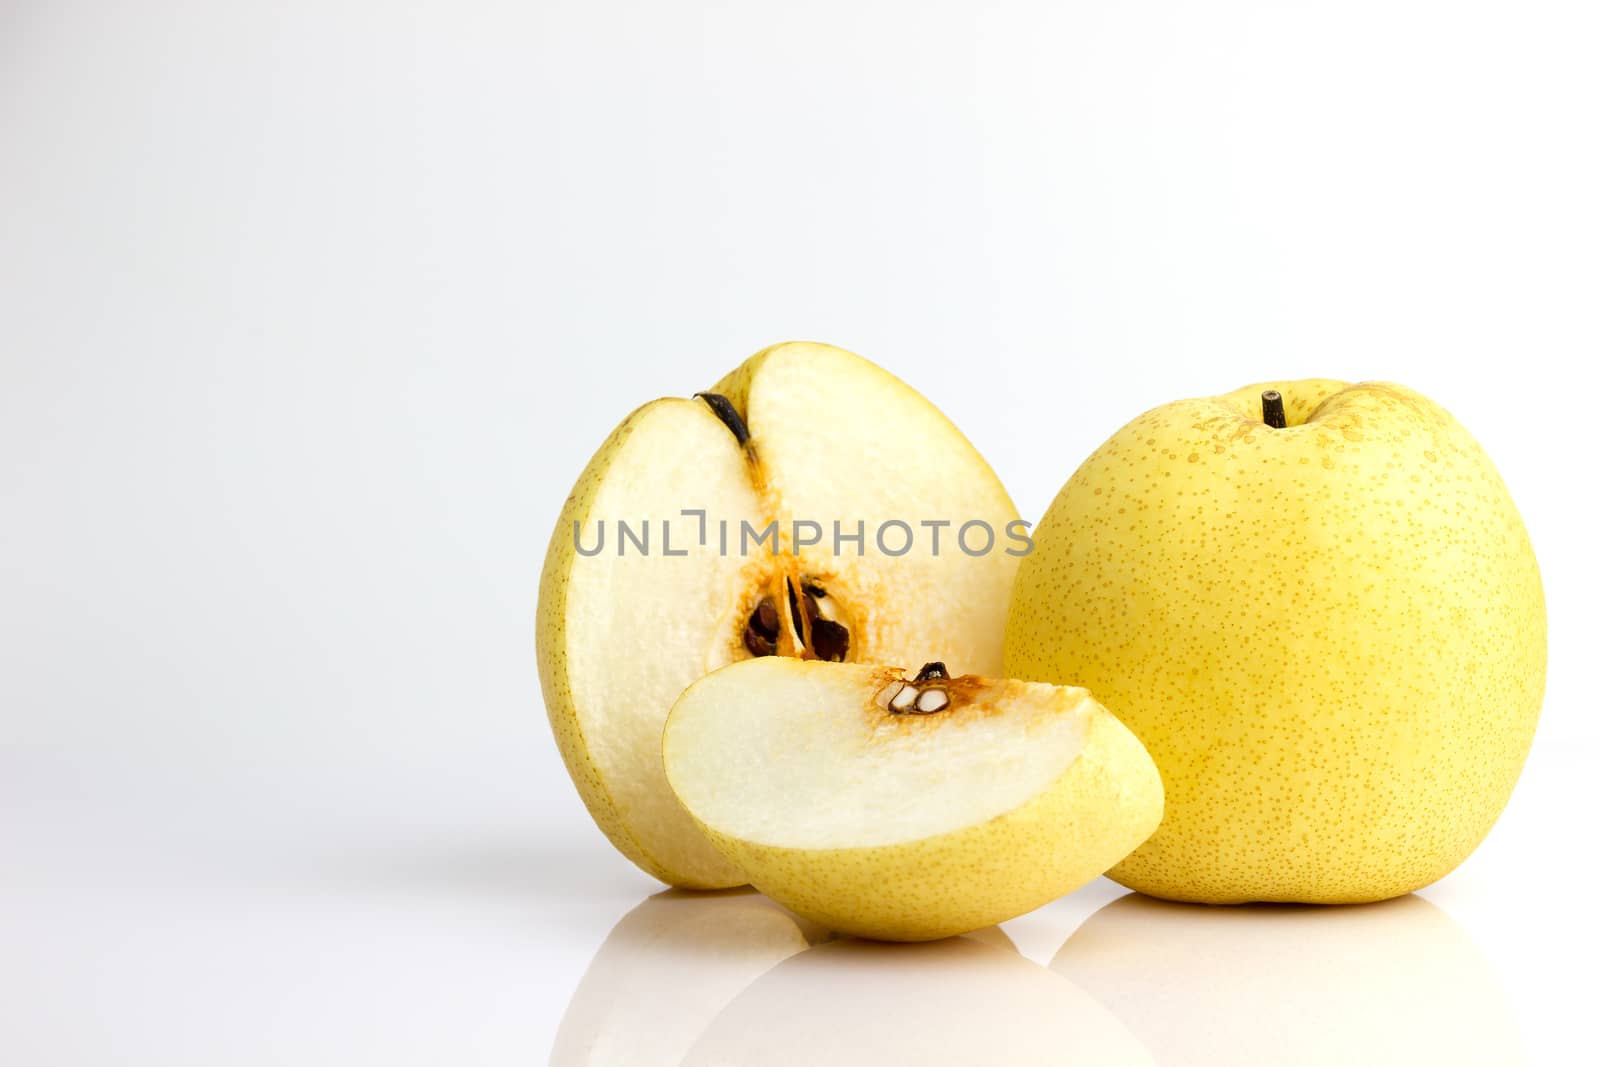 Chinese pear and reflection on white background. Healthy fruit.